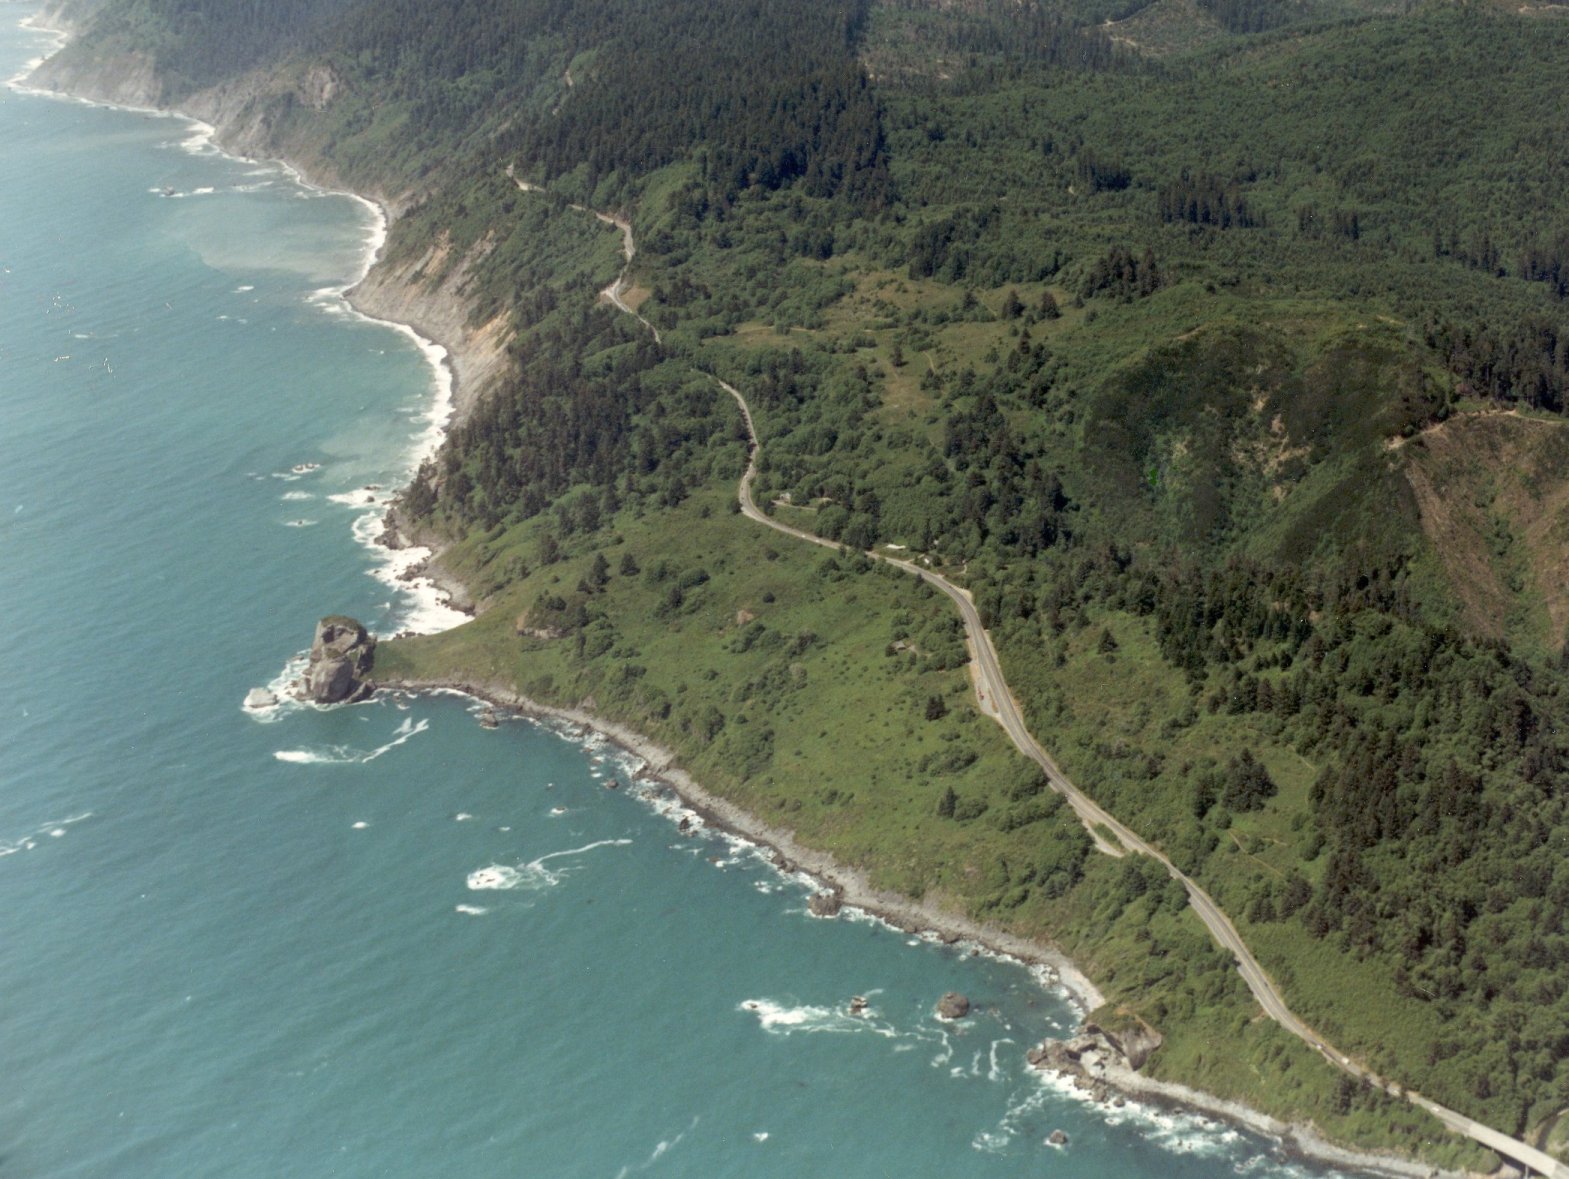 Highway 101 parallels the Pacific coast in Del Norte county.